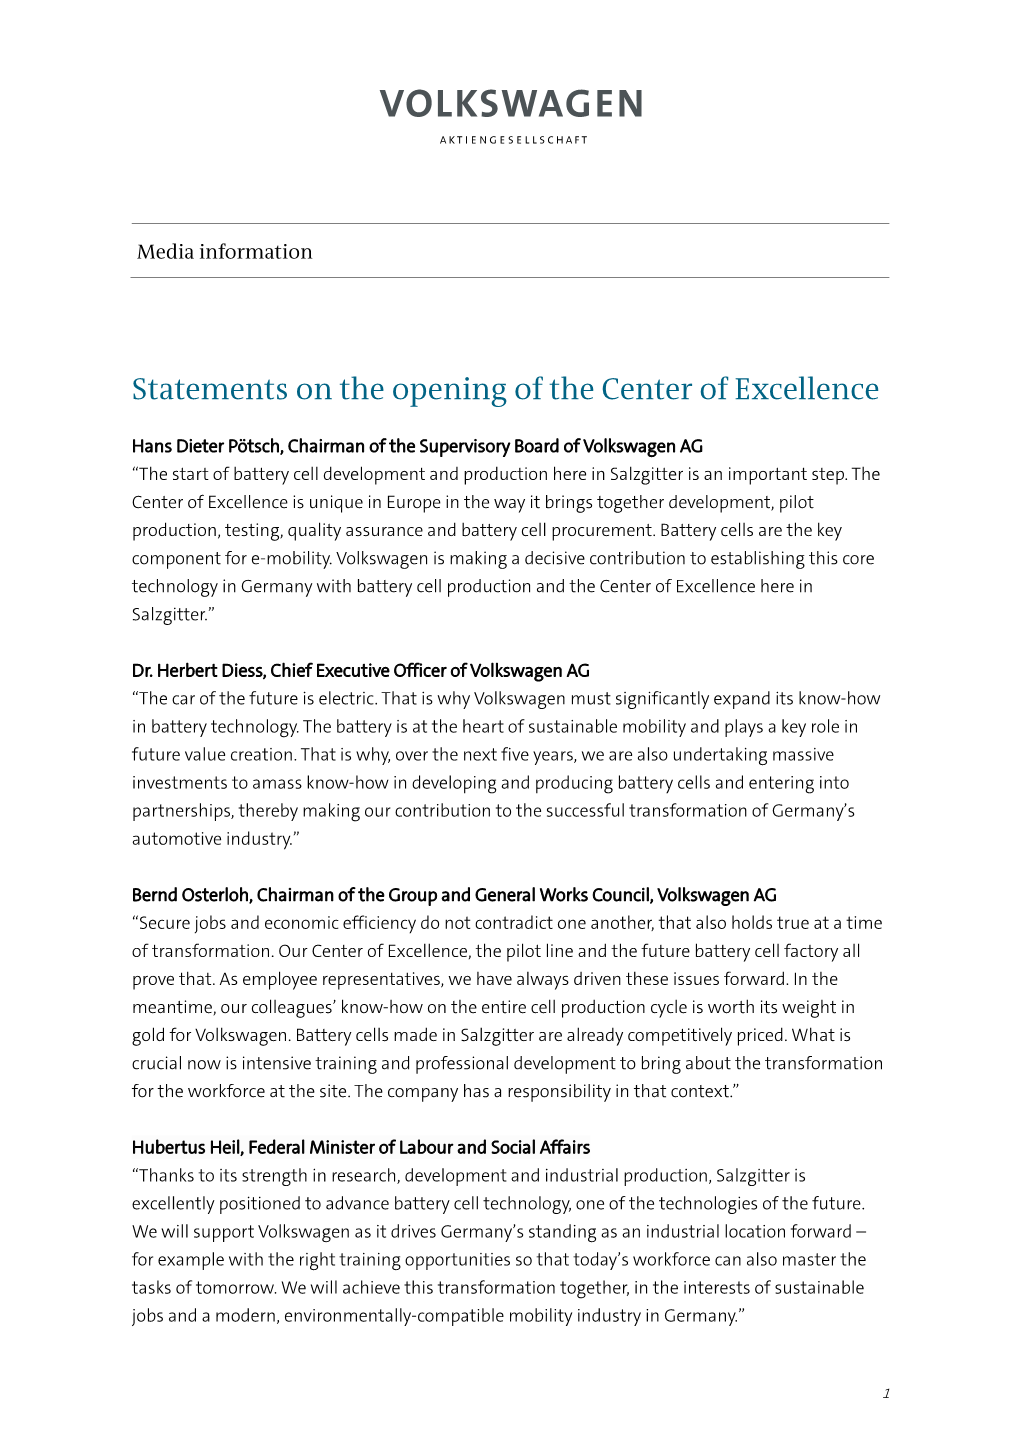 Statements on the Opening of the Center of Excellence